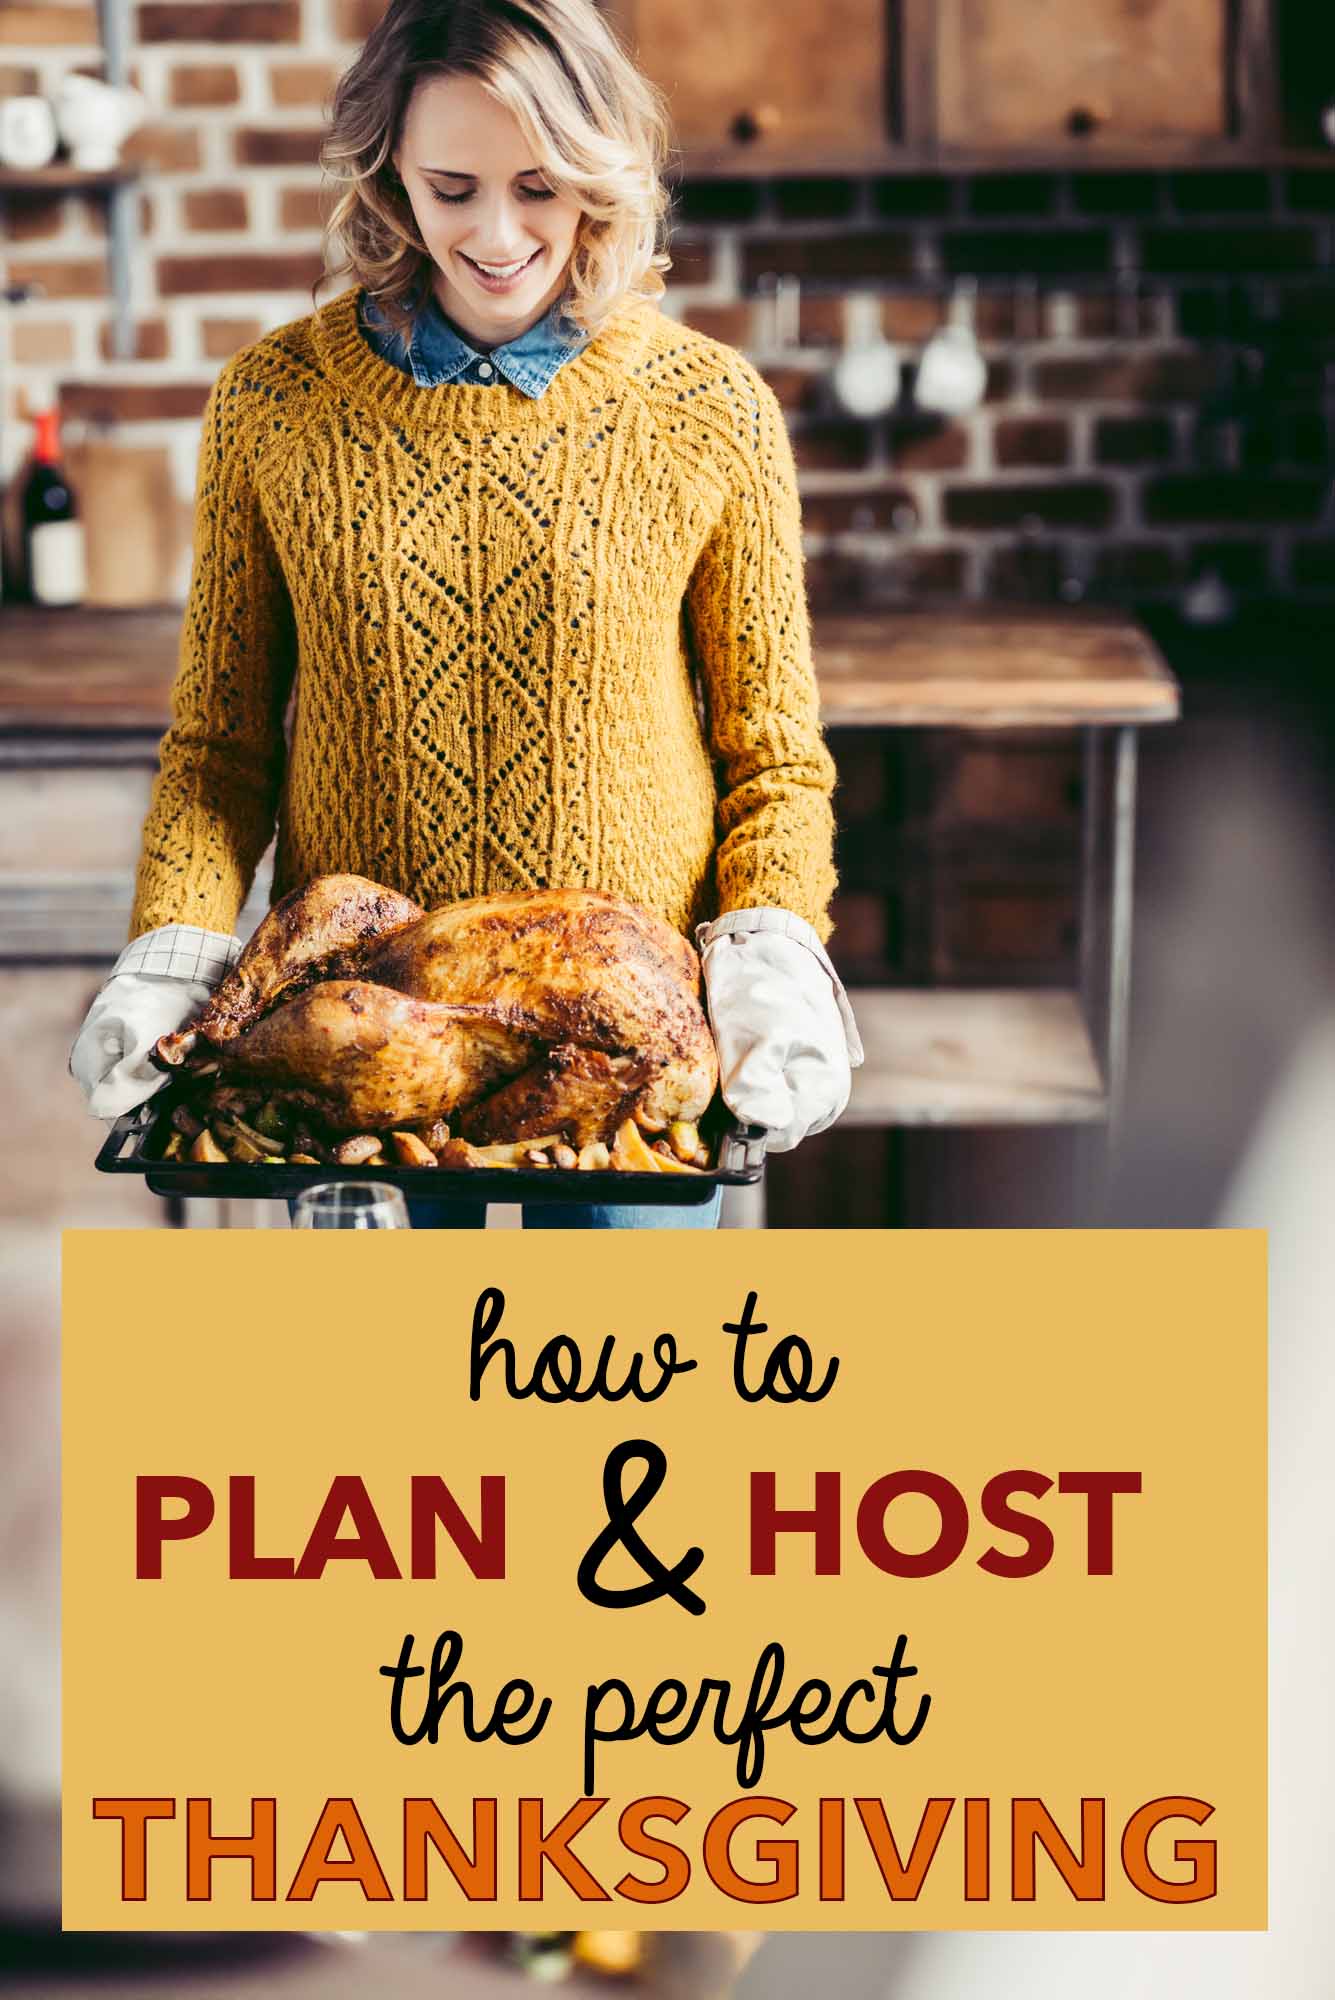 This step-by-step guide will help you plan and host a perfect Thanksgiving meal for friends and family. Find ideas for recipe planning, setting the table, and even when to plan your outfit! Get rid of the stress and enjoy hosting Thanksgiving! via @lara_neves